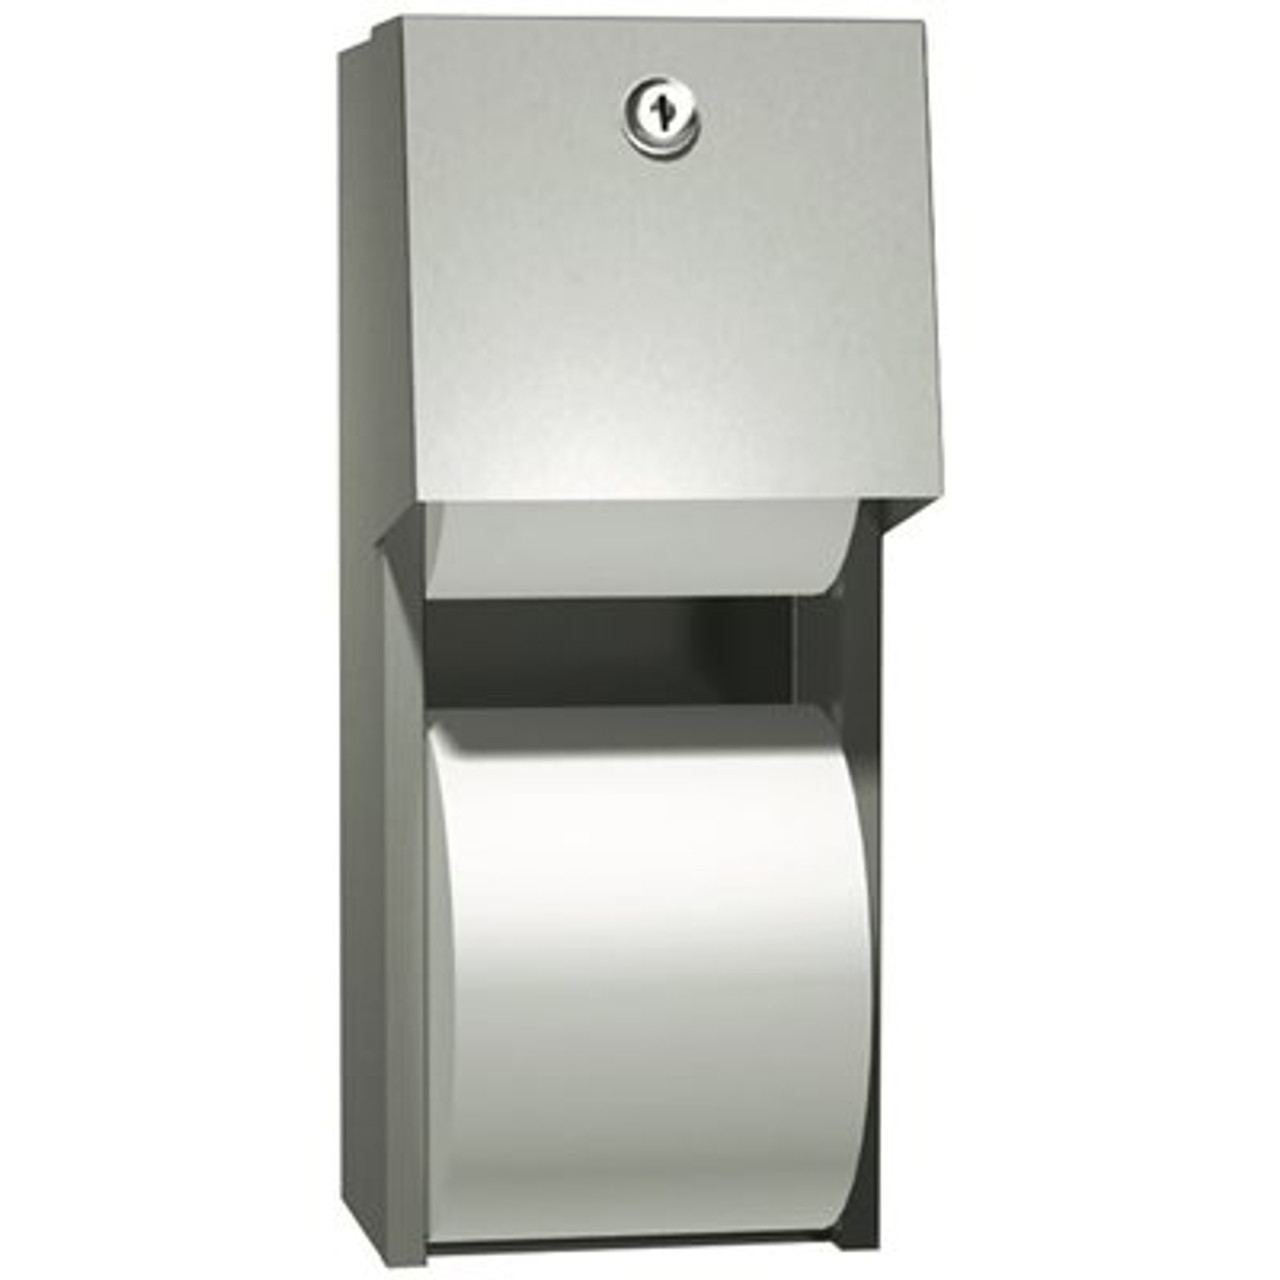 Roval Commercial Surface Mounted Twin Hide-A-Roll Toilet Paper Dispenser in Stainless Steel